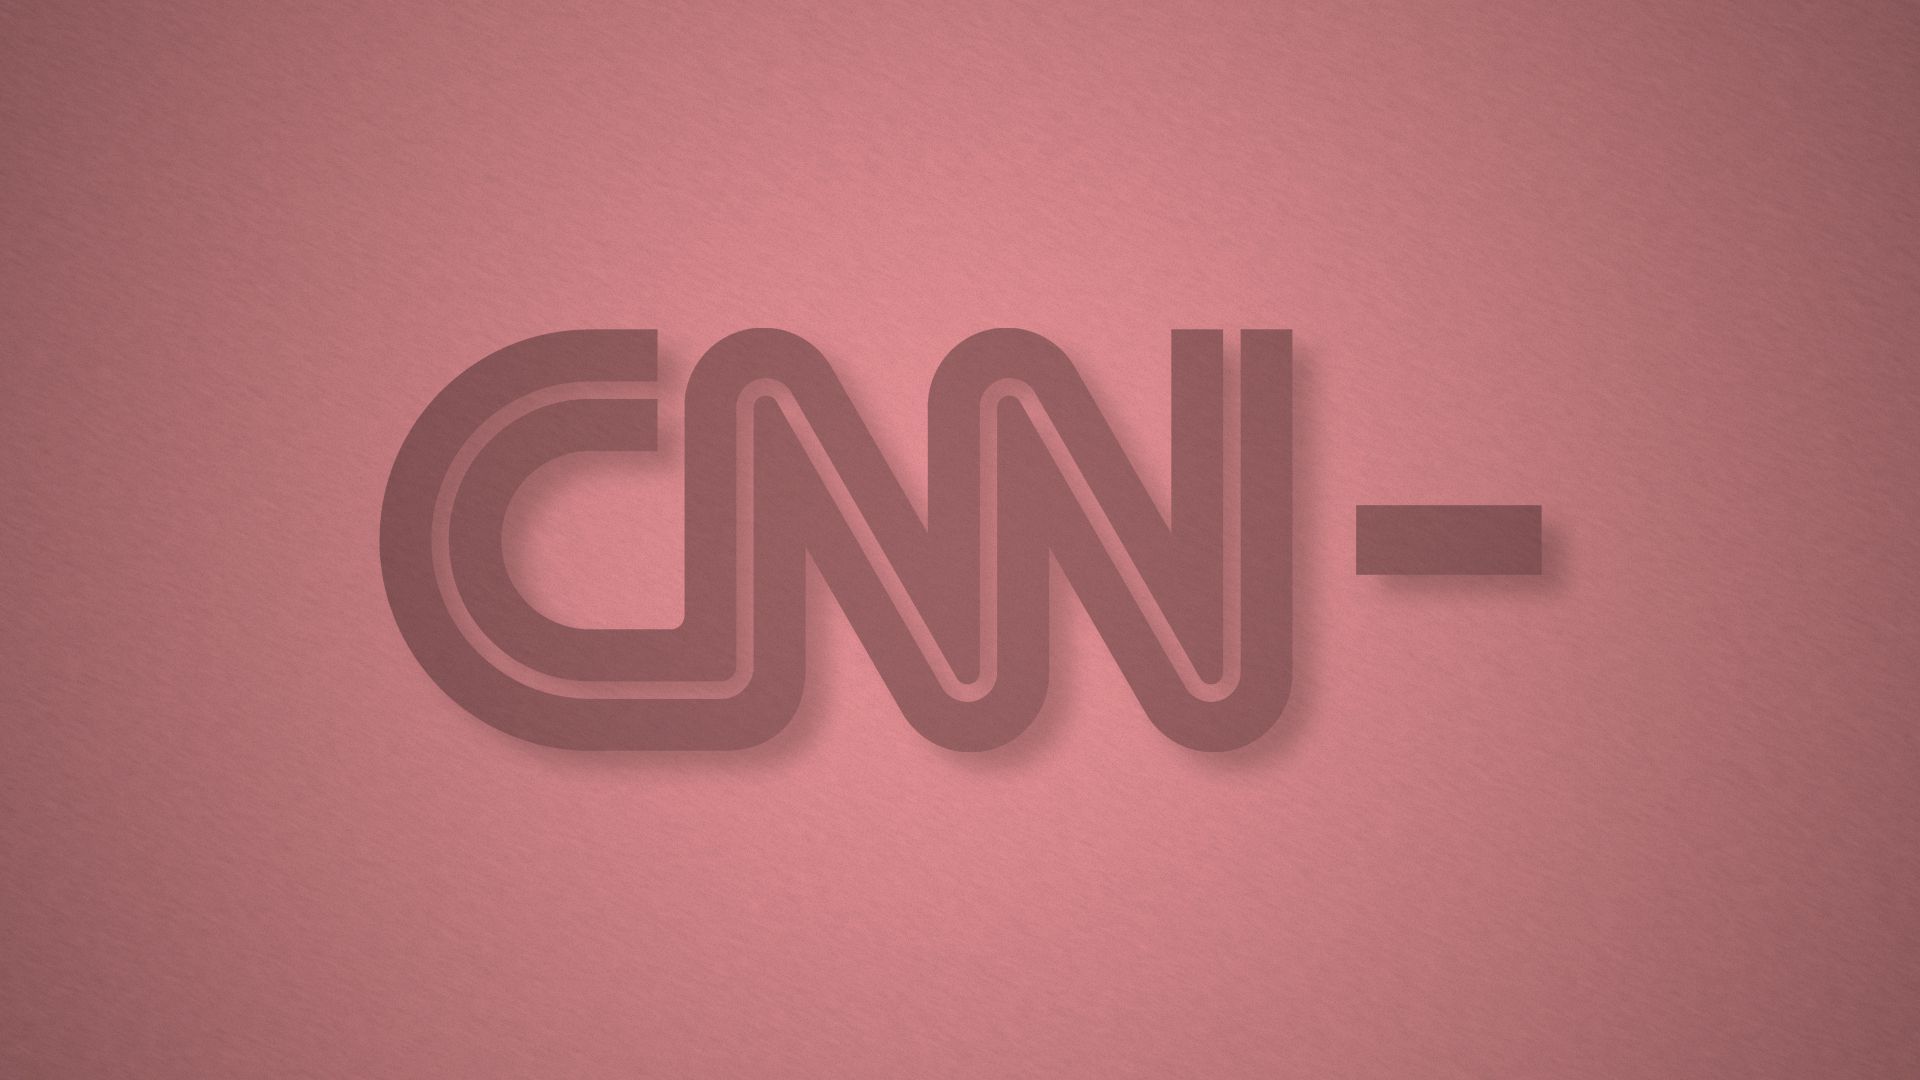 Illustration of the CNN+ logo with a minus replacing the plus sign.